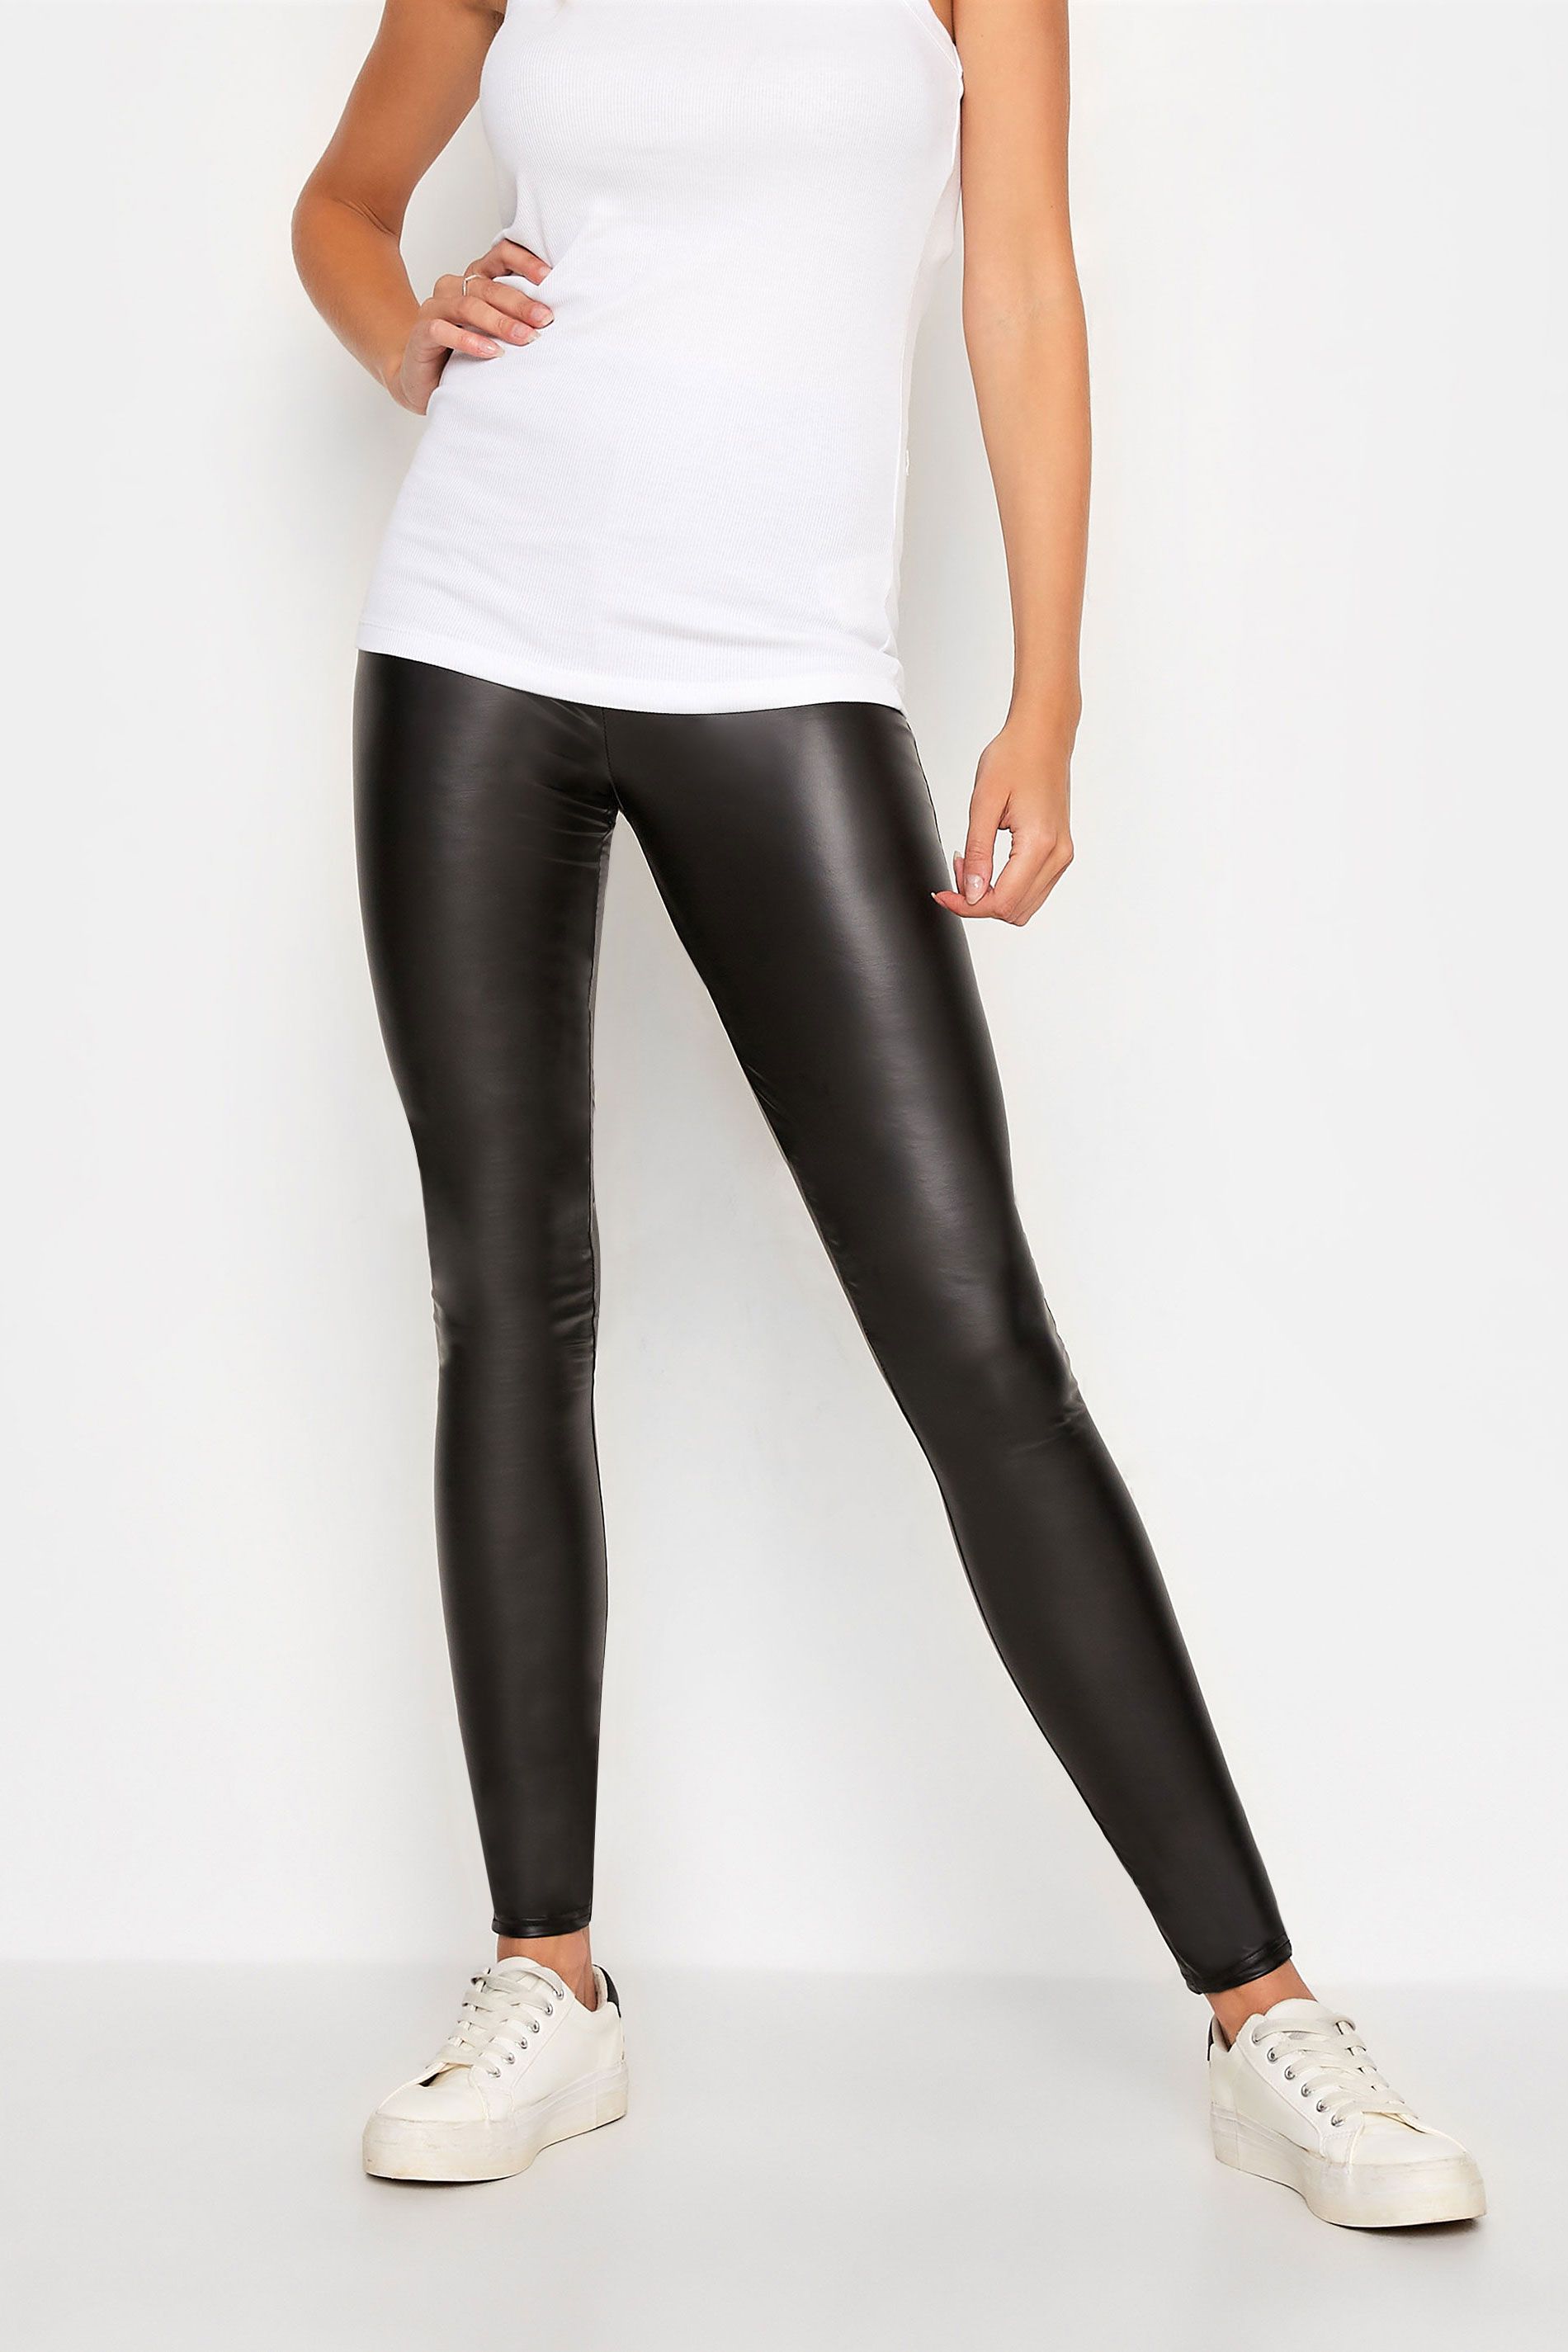 LTS Tall Black Stretch Leather Look Leggings | Long Tall Sally